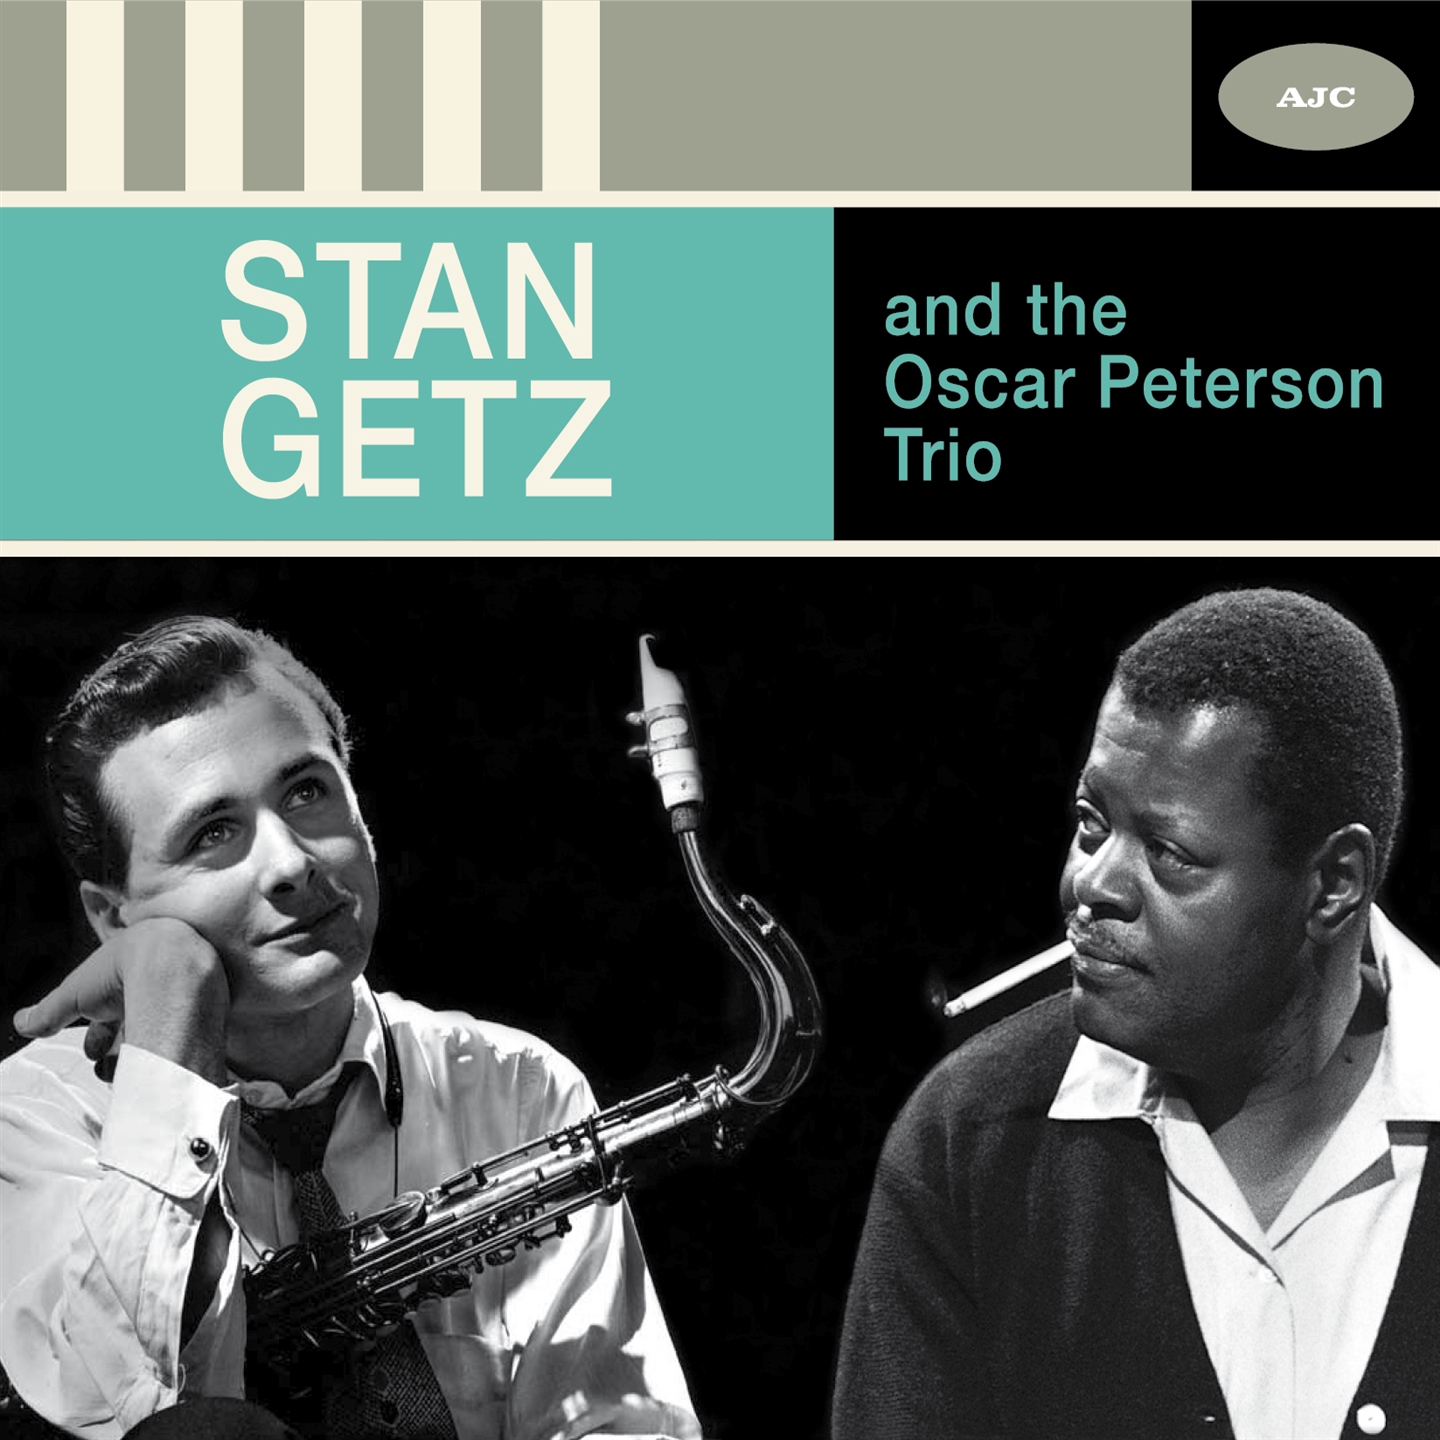 STAN GETZ AND THE OSCART PETERSON TRIO - THE COMPLETE SESSION